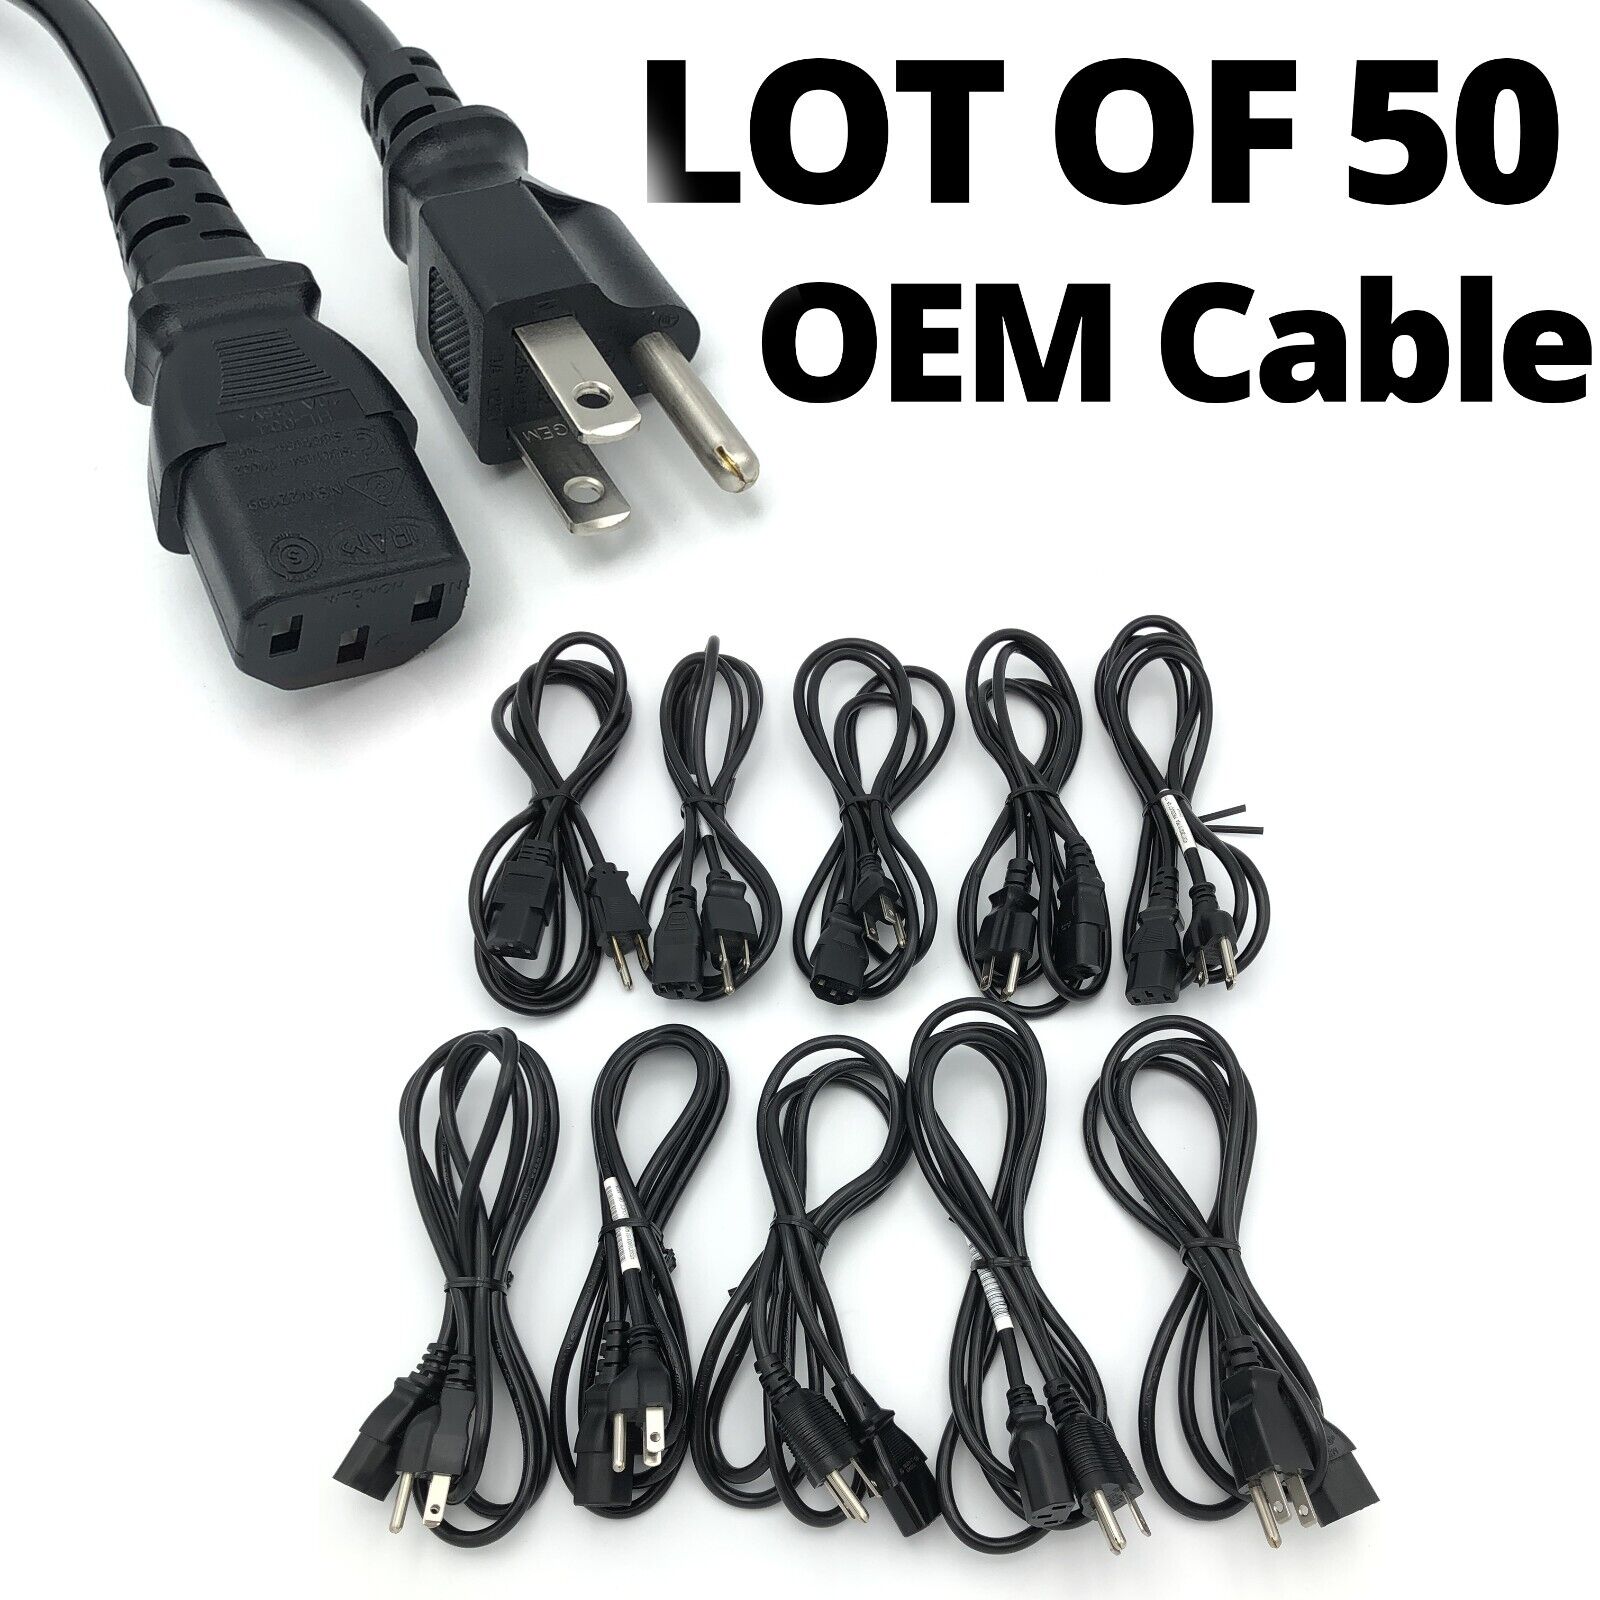 ⚡Branded LOT 50 6ft 3-Prong AC Power Cord Cable for Laptop PC Printers Scanners⚡